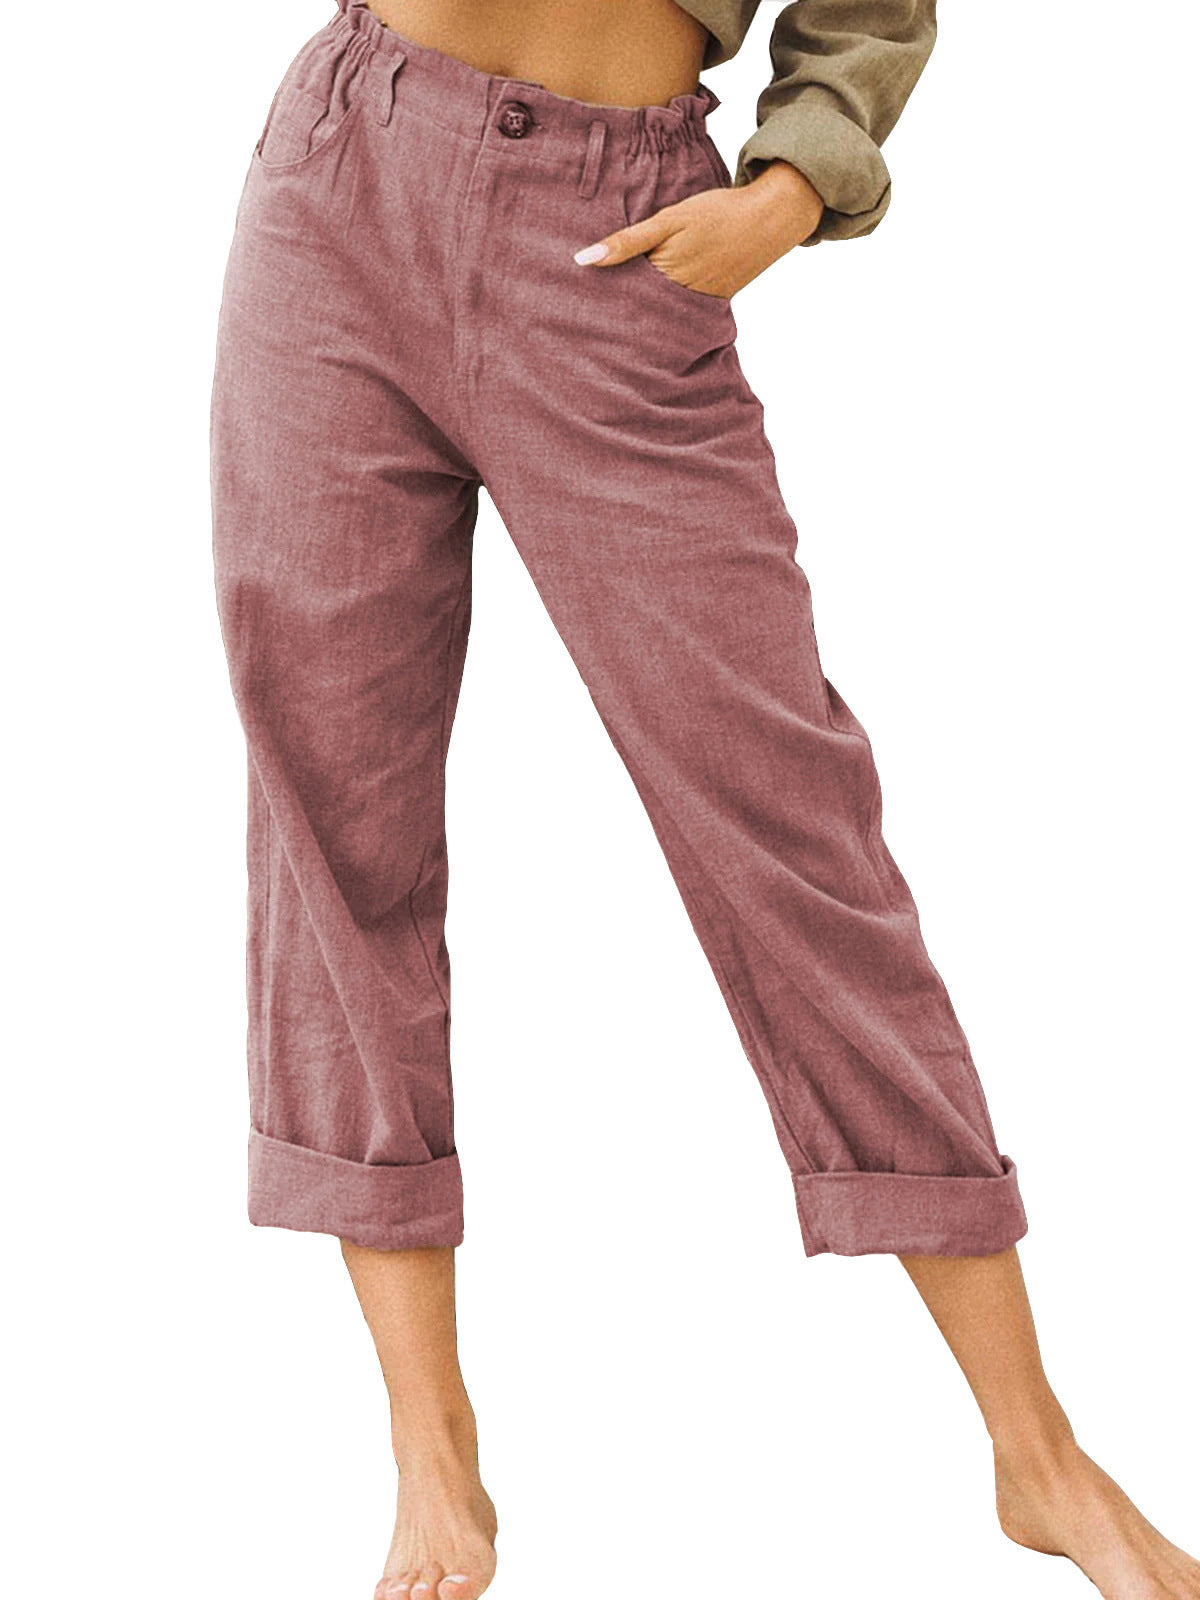 Women's Cotton Linen Patchwork Pants with Drawstring Waist and Loose Casual Fit